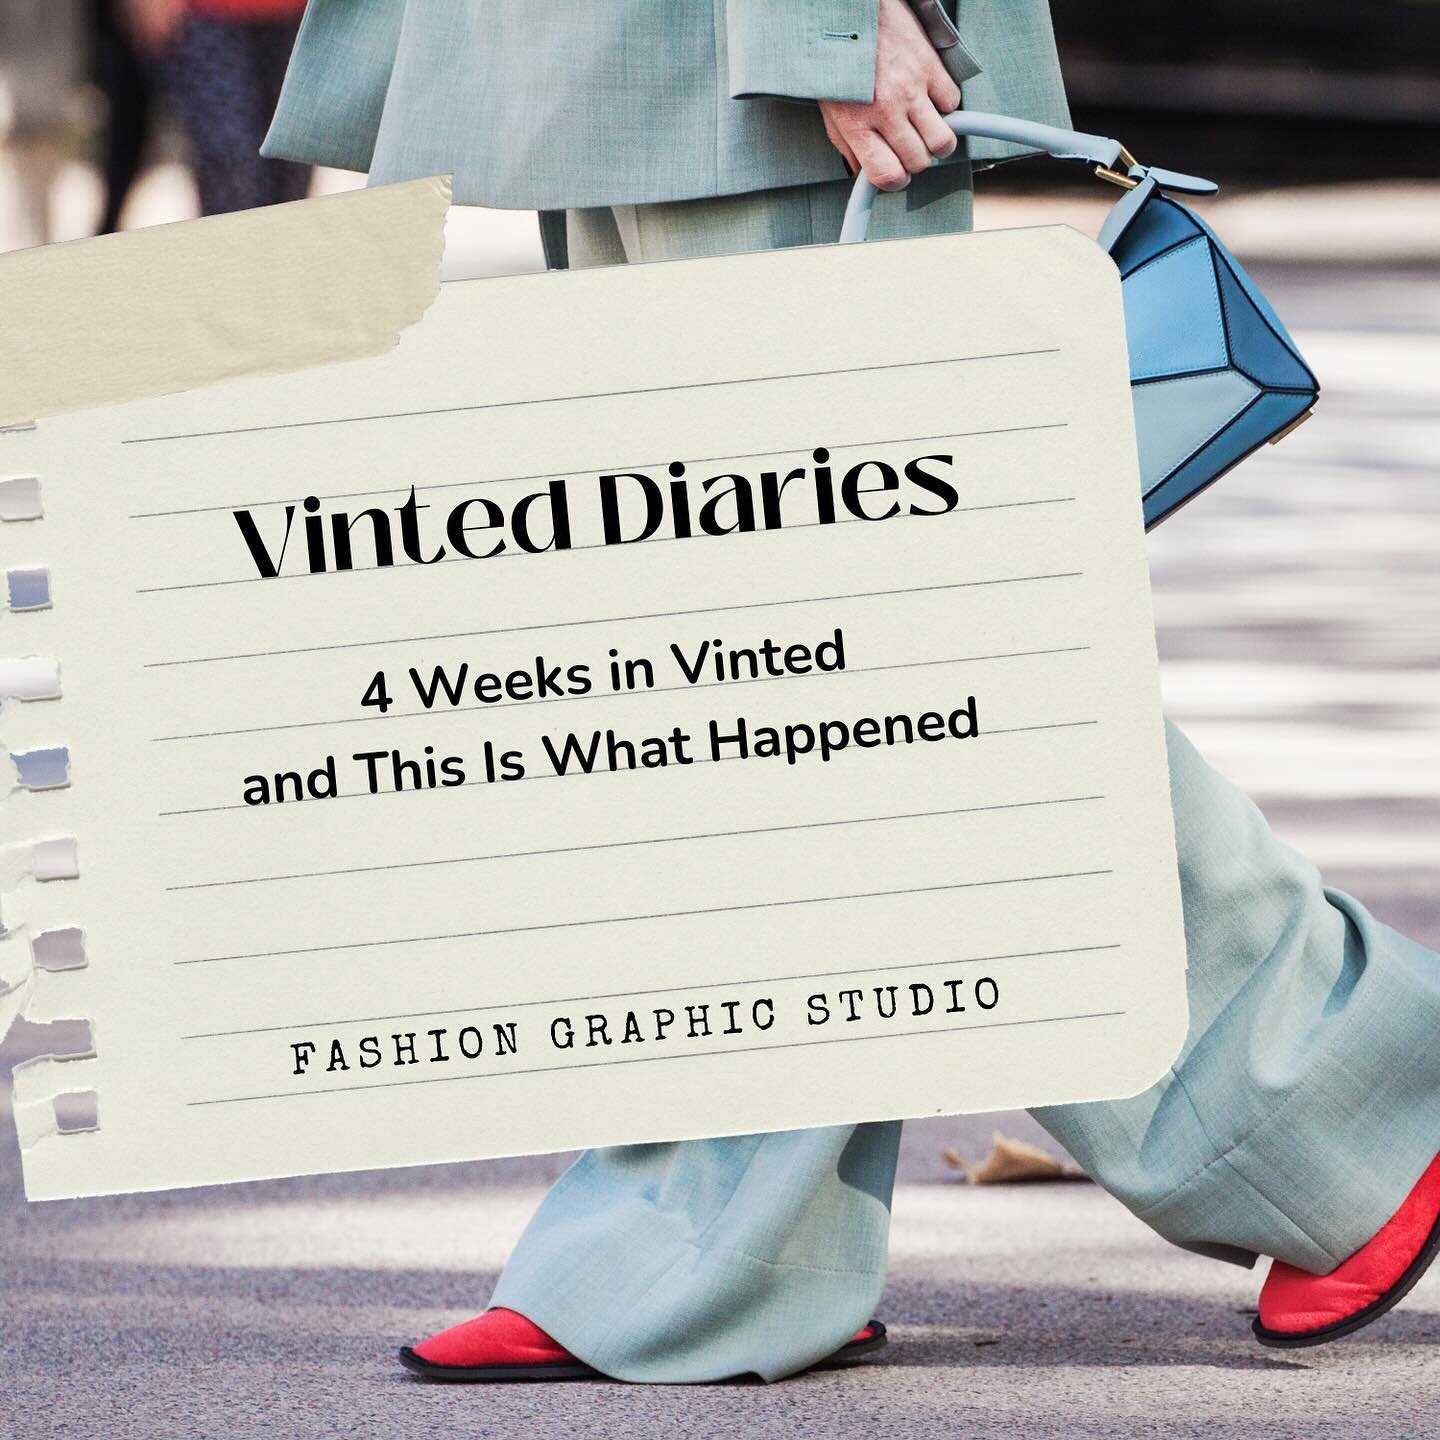 Vinted Diaries, 4 Weeks in Vinted and This Is What Happened

I was skeptical about posting this, but this is a space for fashion, and I thought I should share my experience :)

So, at the start of the year, I got this itch to Marie Kondo my life. You